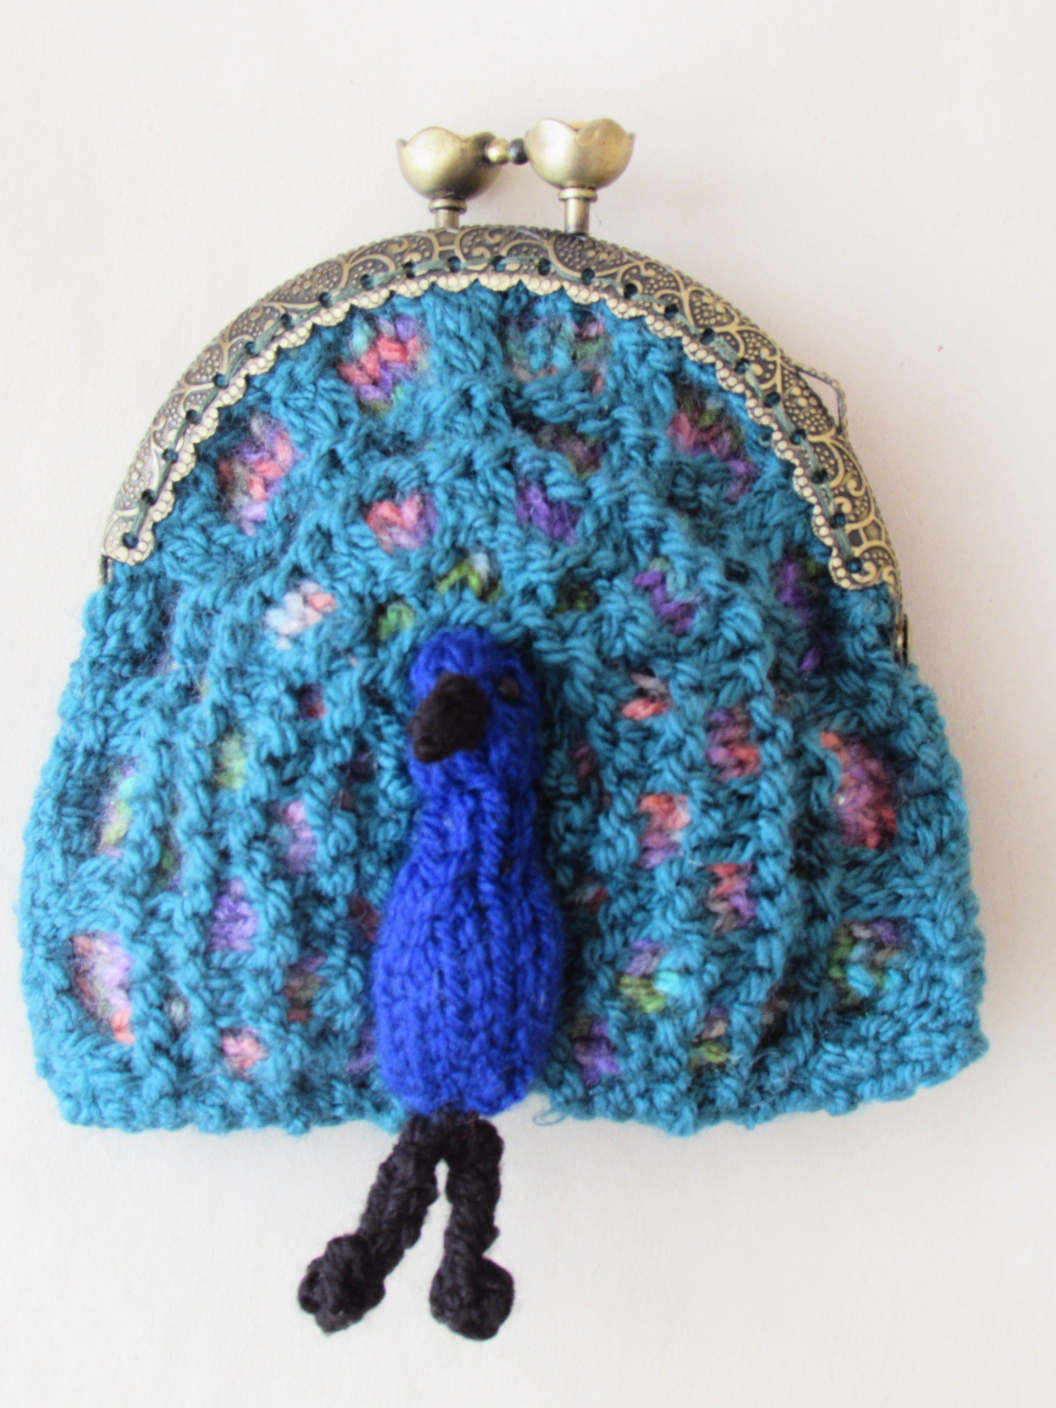 Easy Crocheted Purse Instructions (free)